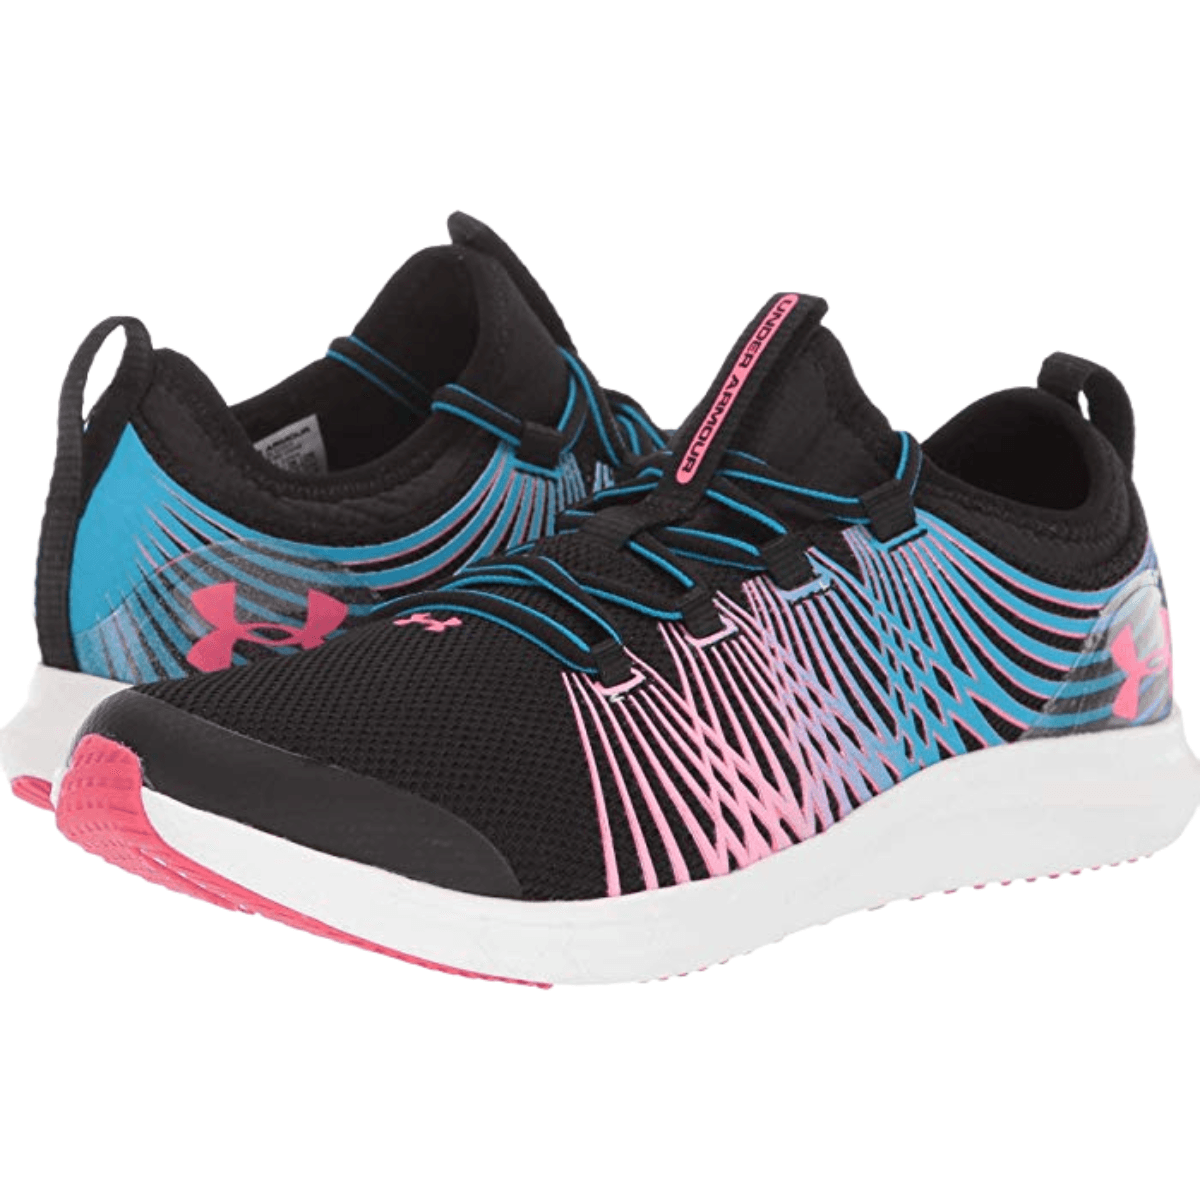 Under Armour Surge Toddler Girls' Running Shoes